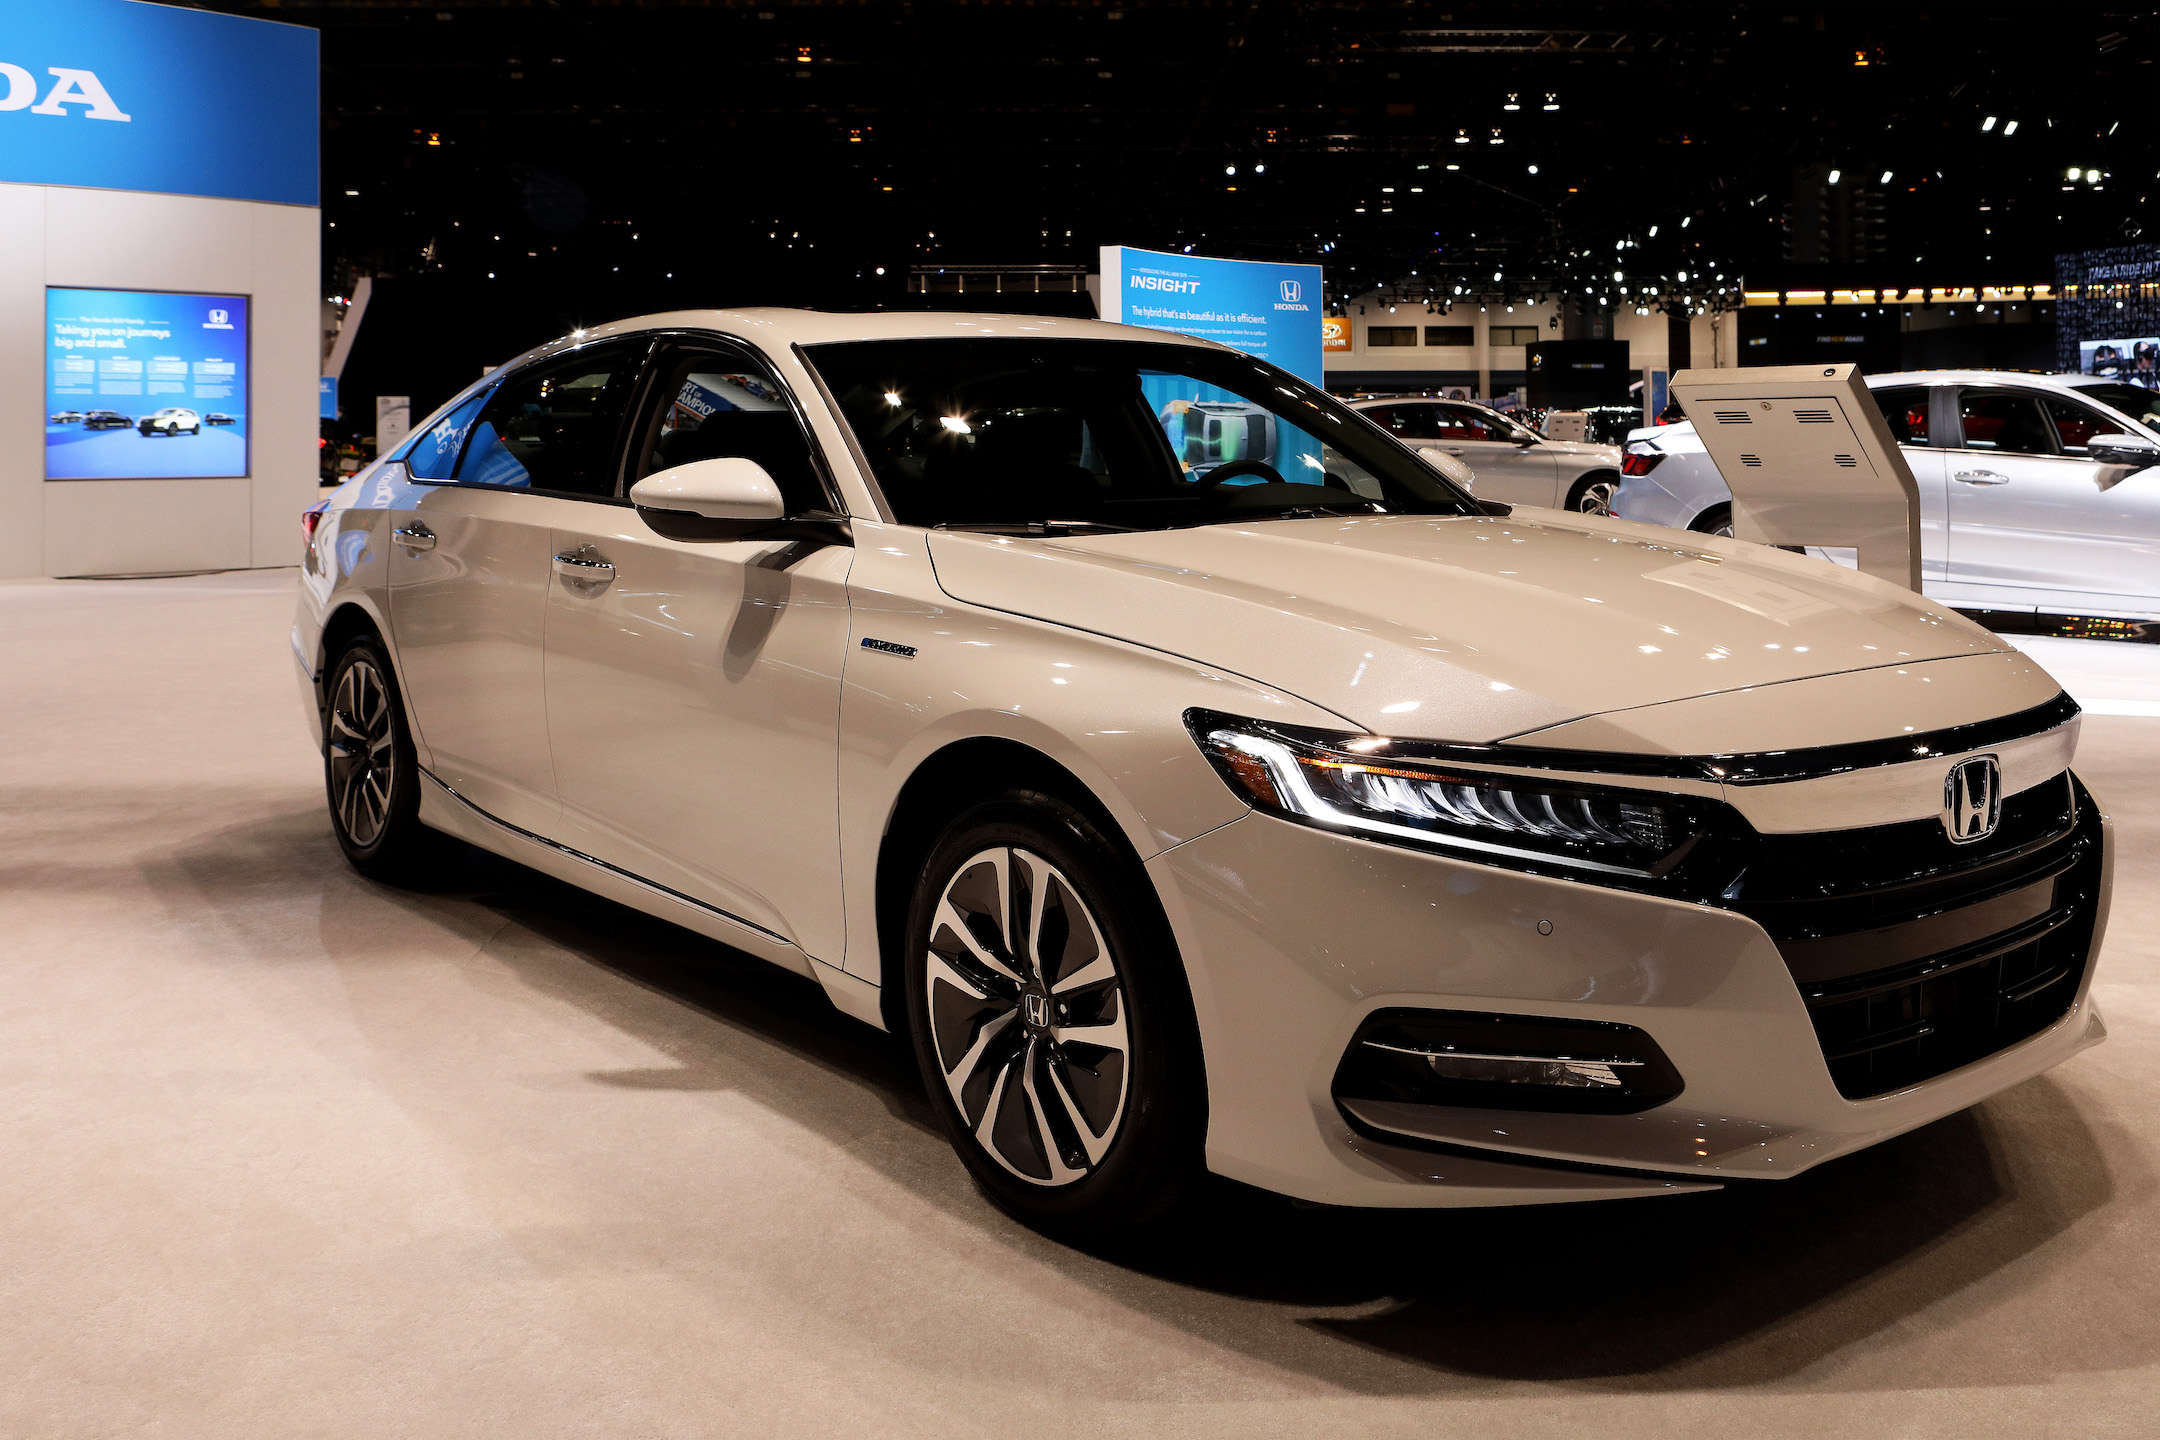 2019 Honda Accord Hybrid is on display at the 111th Annual Chicago Auto Show